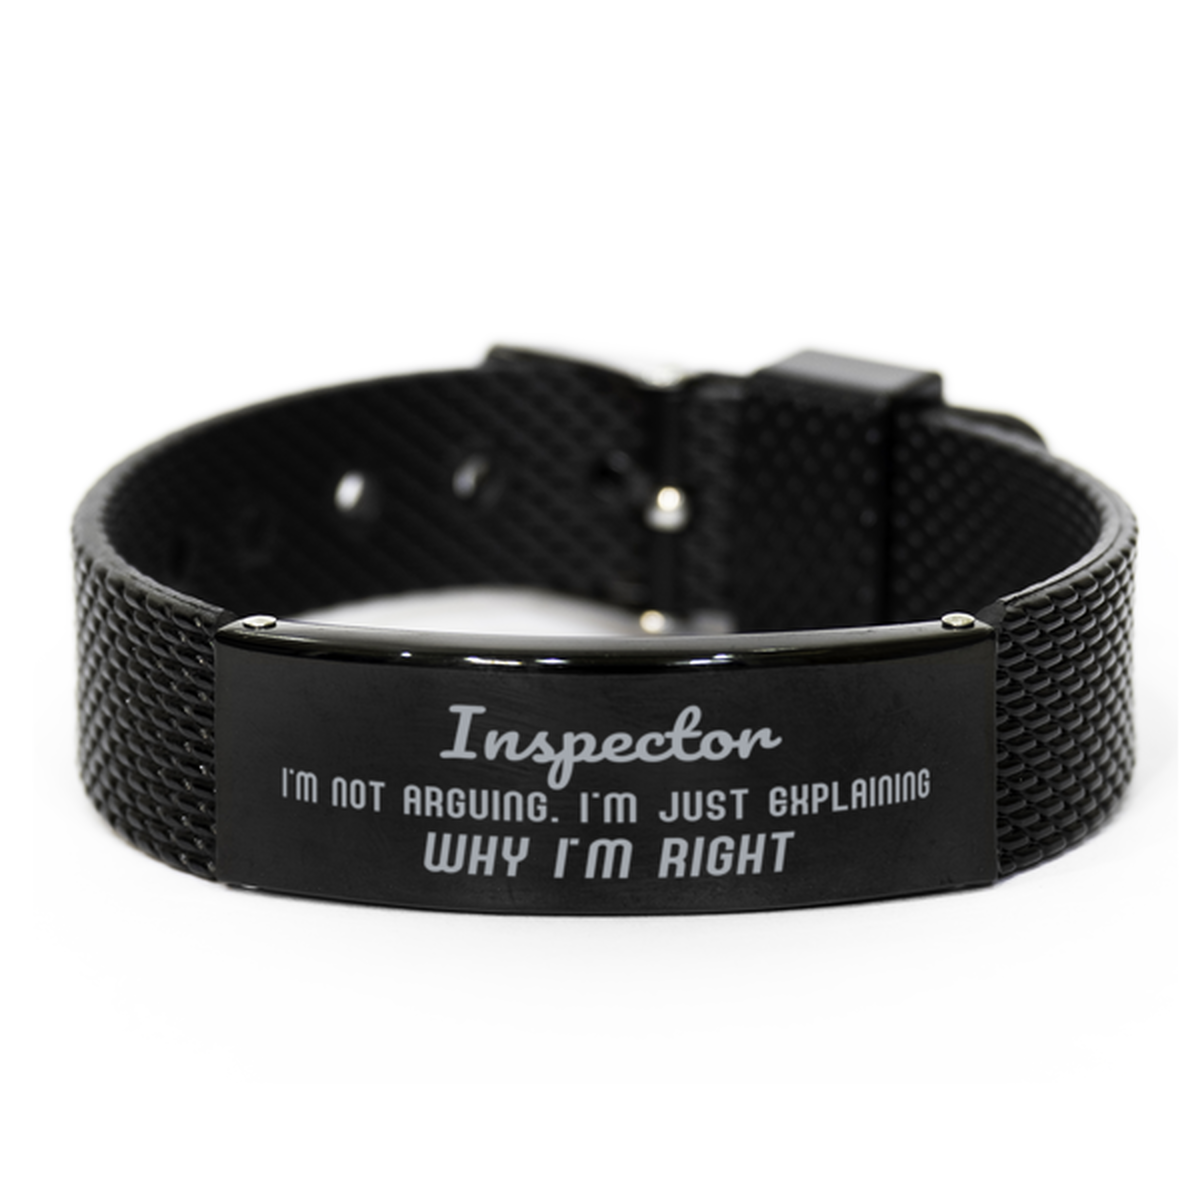 Inspector I'm not Arguing. I'm Just Explaining Why I'm RIGHT Black Shark Mesh Bracelet, Funny Saying Quote Inspector Gifts For Inspector Graduation Birthday Christmas Gifts for Men Women Coworker